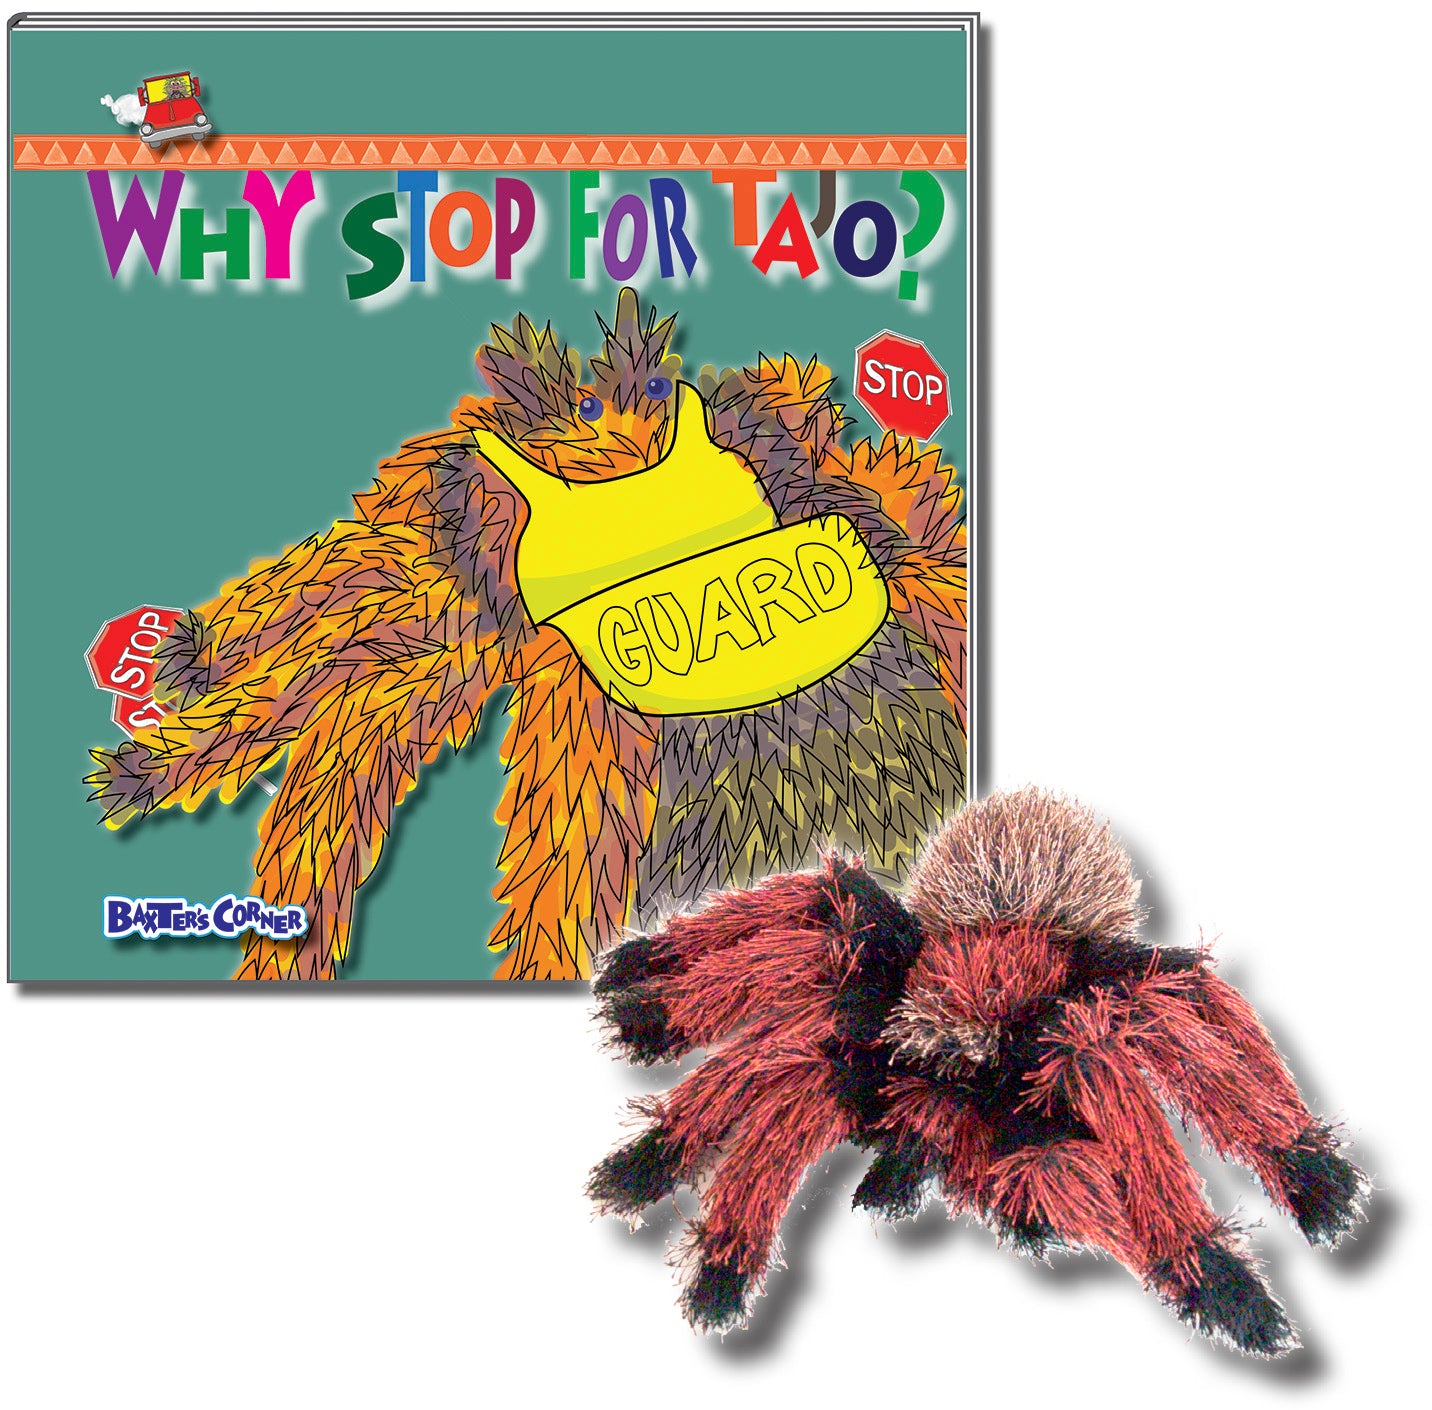 Tajo Gift Set - "Why Stop For Tajo" Hardcover, a Story About Respecting Authority + Folkmanis Puppet